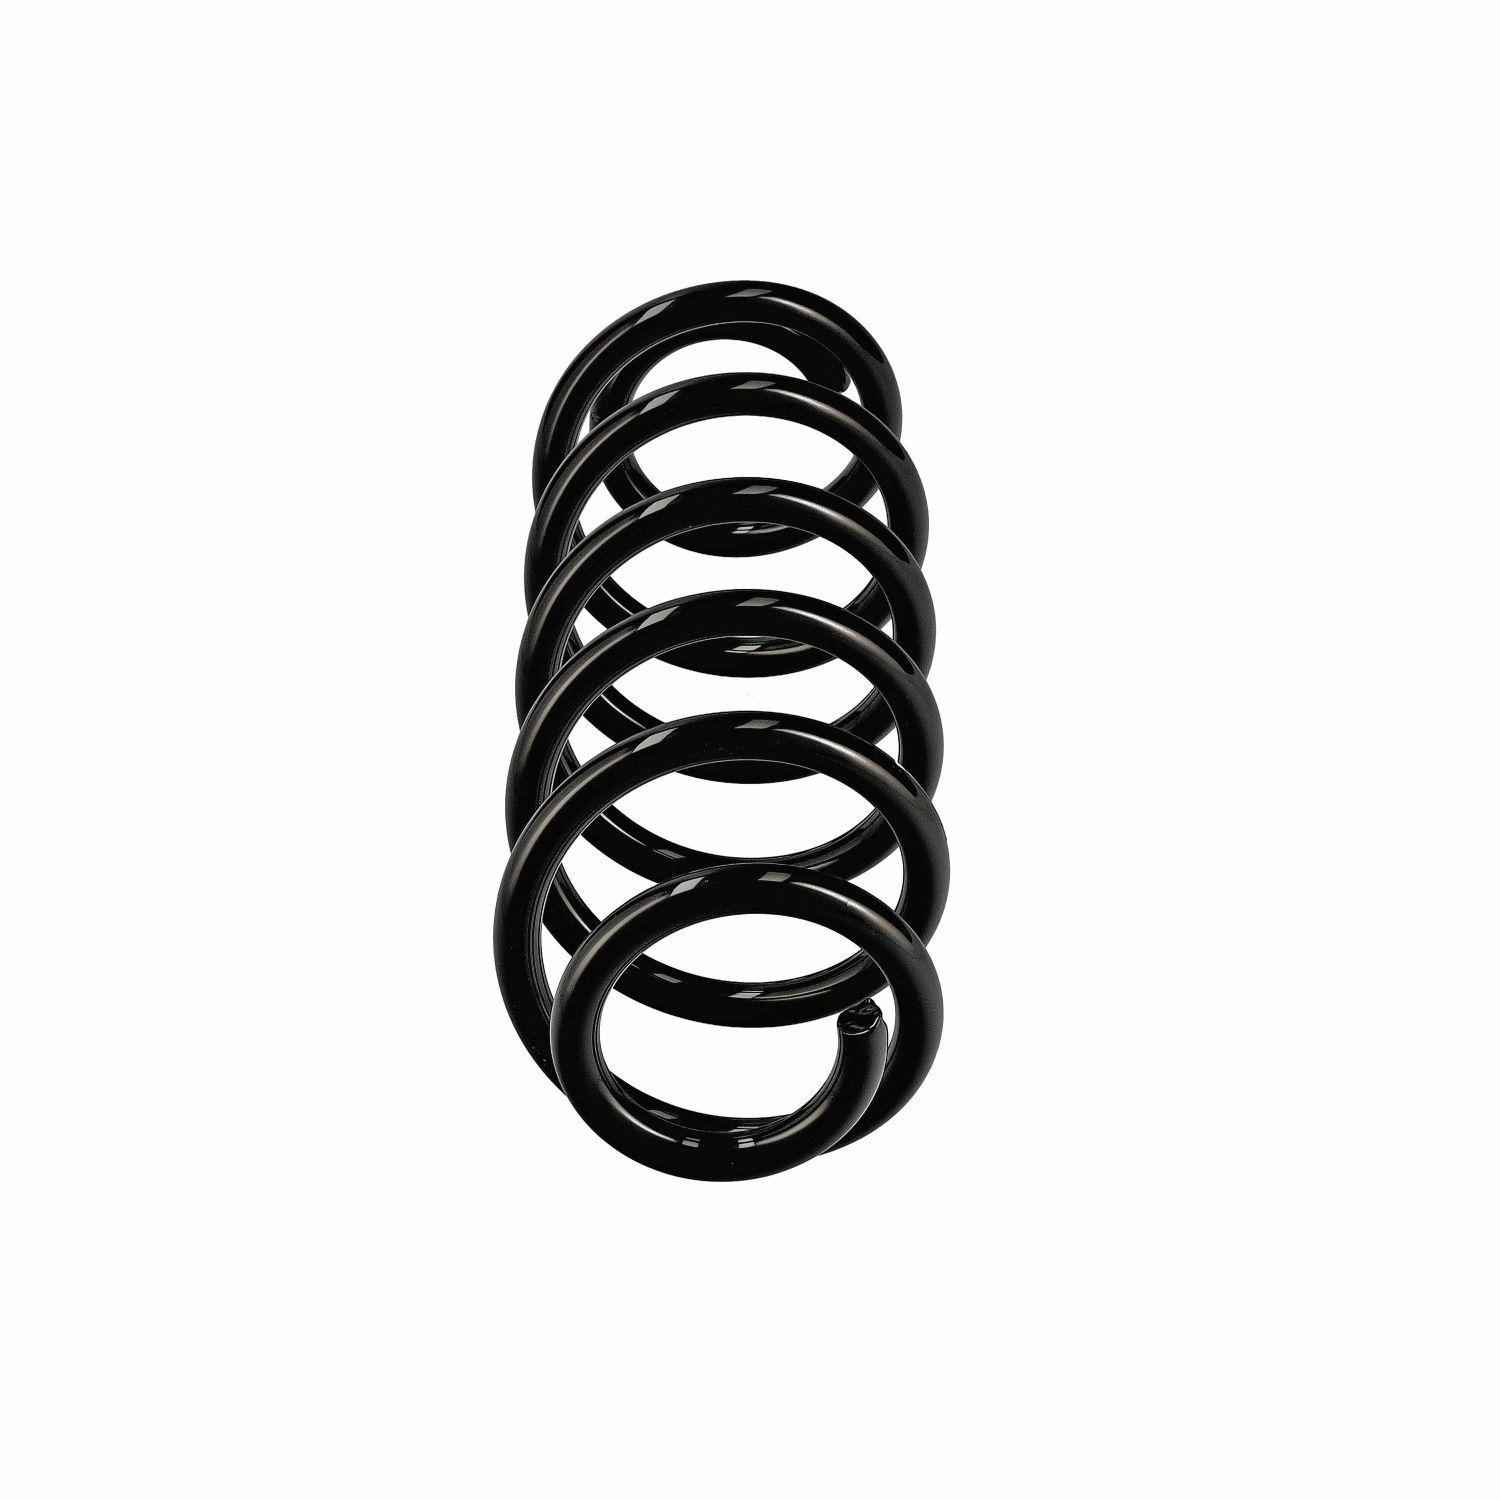 EIBACH Springs rear and front Passat 3g5 new R17766